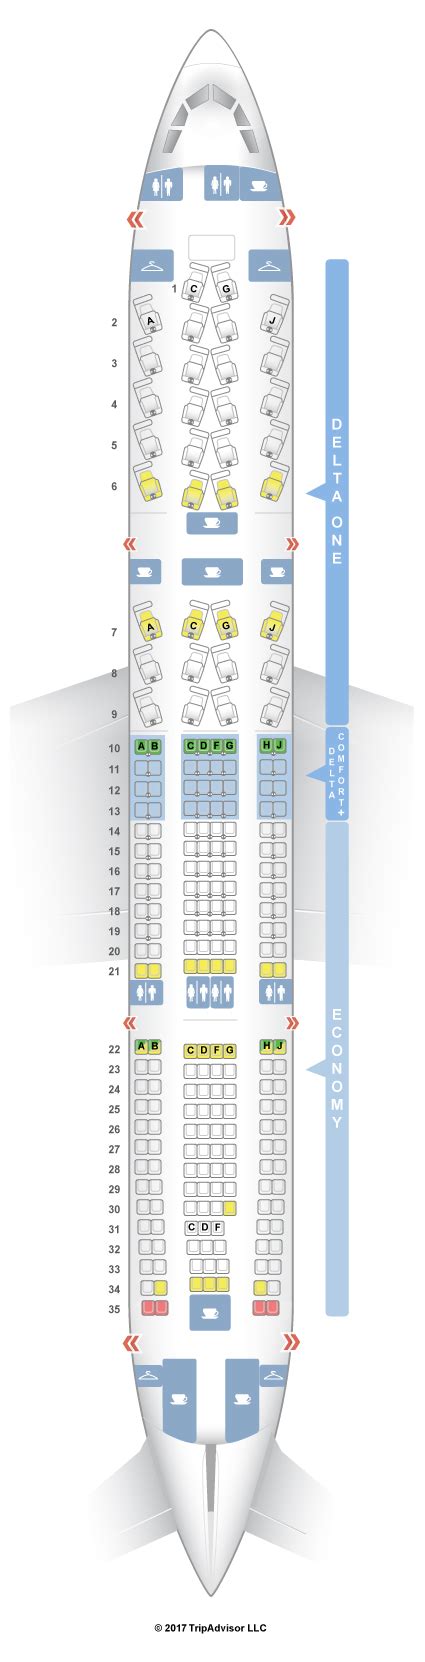 These planes have a two-class configuration, with 24